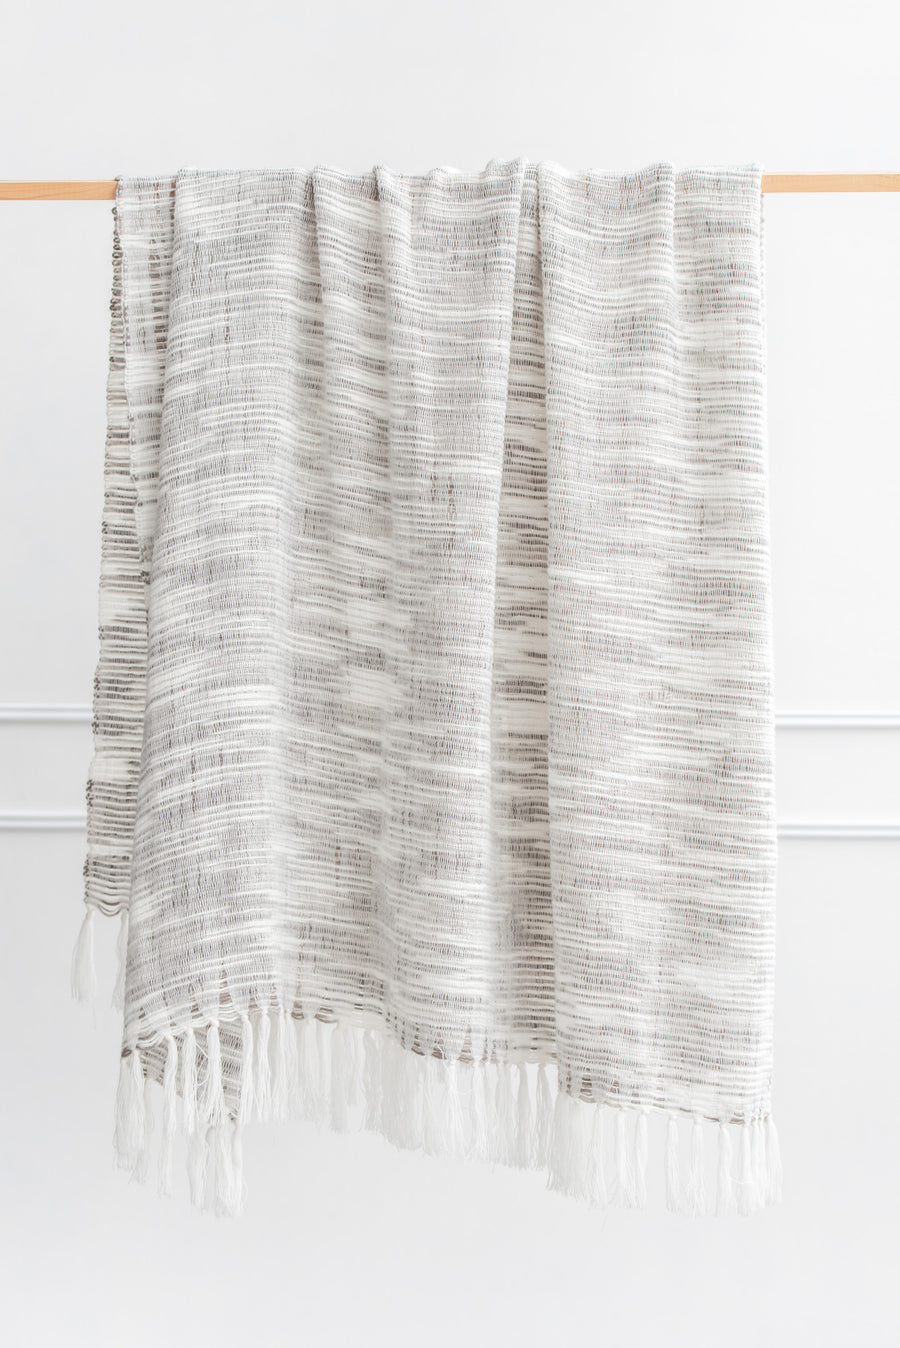 Modern Decorative Knitted Throw Blanket with Tassels, Gray and White, 50